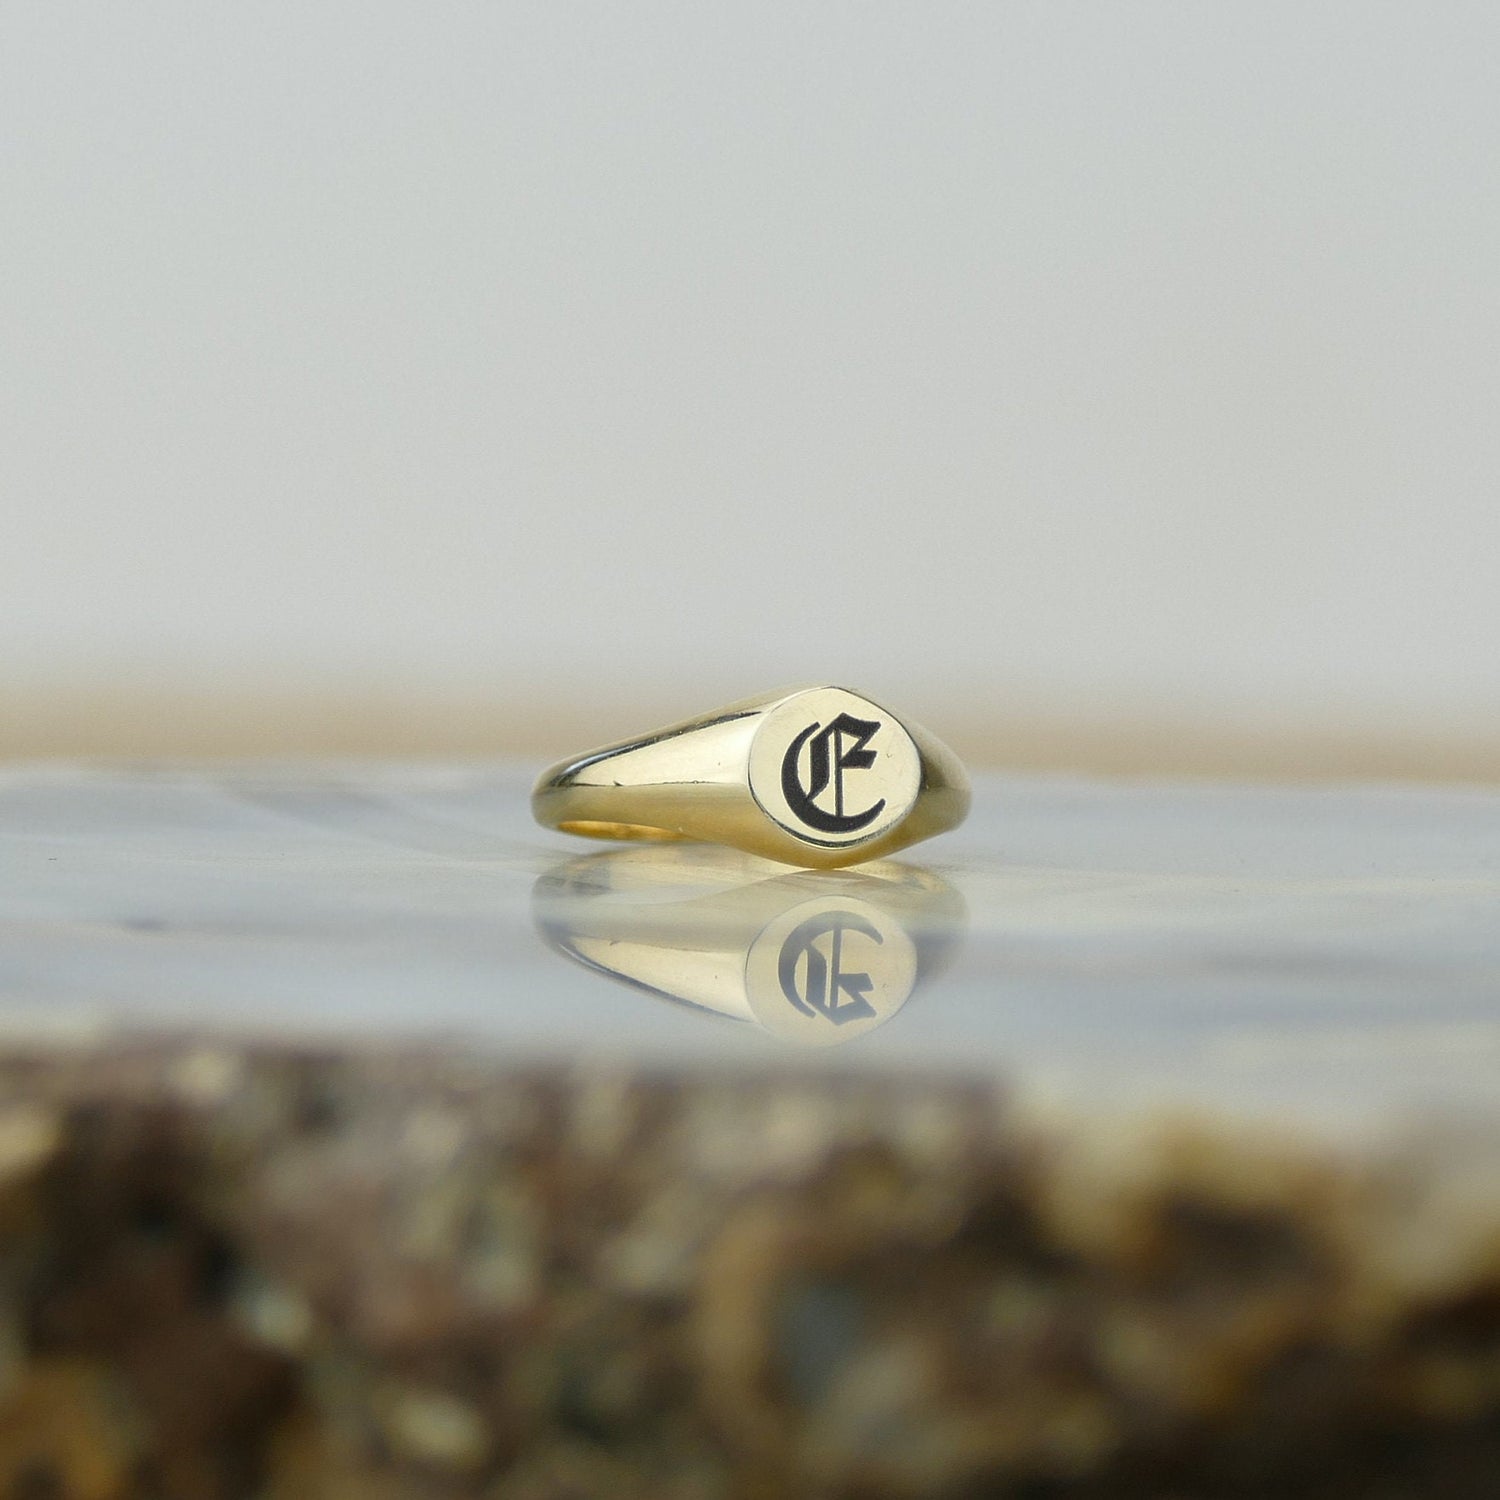 Gold Engraved ring in jewellery photoshoot